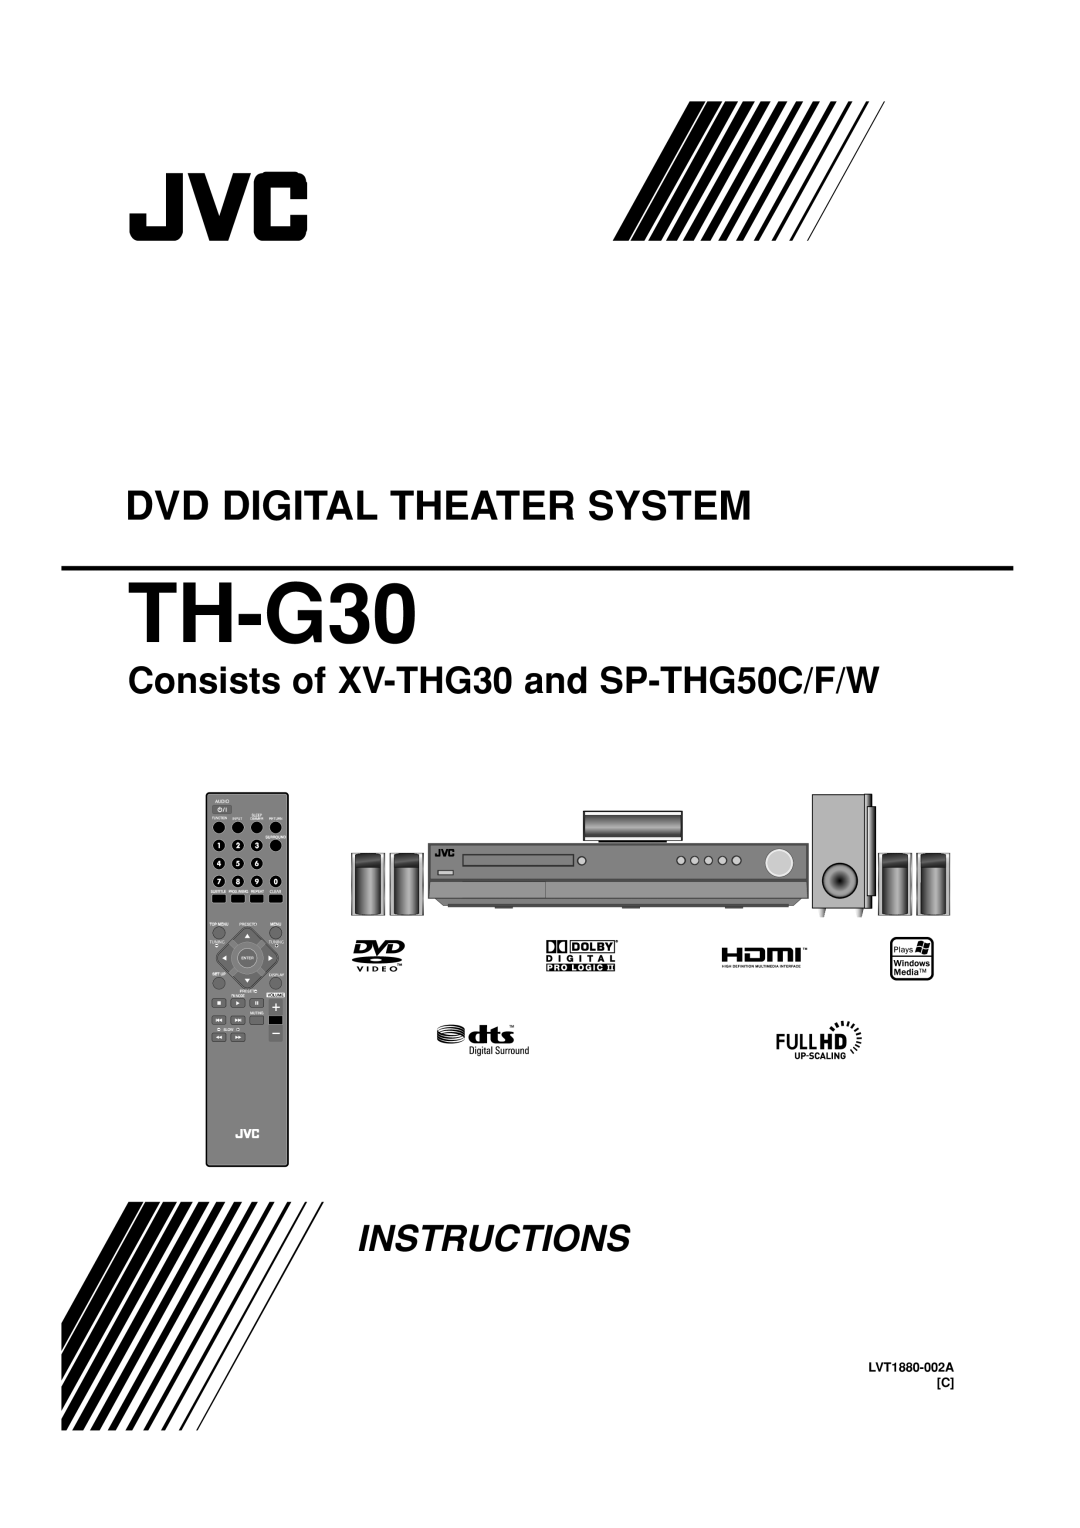 JVC TH-G40 manual TH-G30, Dvd Digital Theater System, Consists of XV-THG30 and SP-THG50C/F/W, Instructions, LVT1880-002A C 